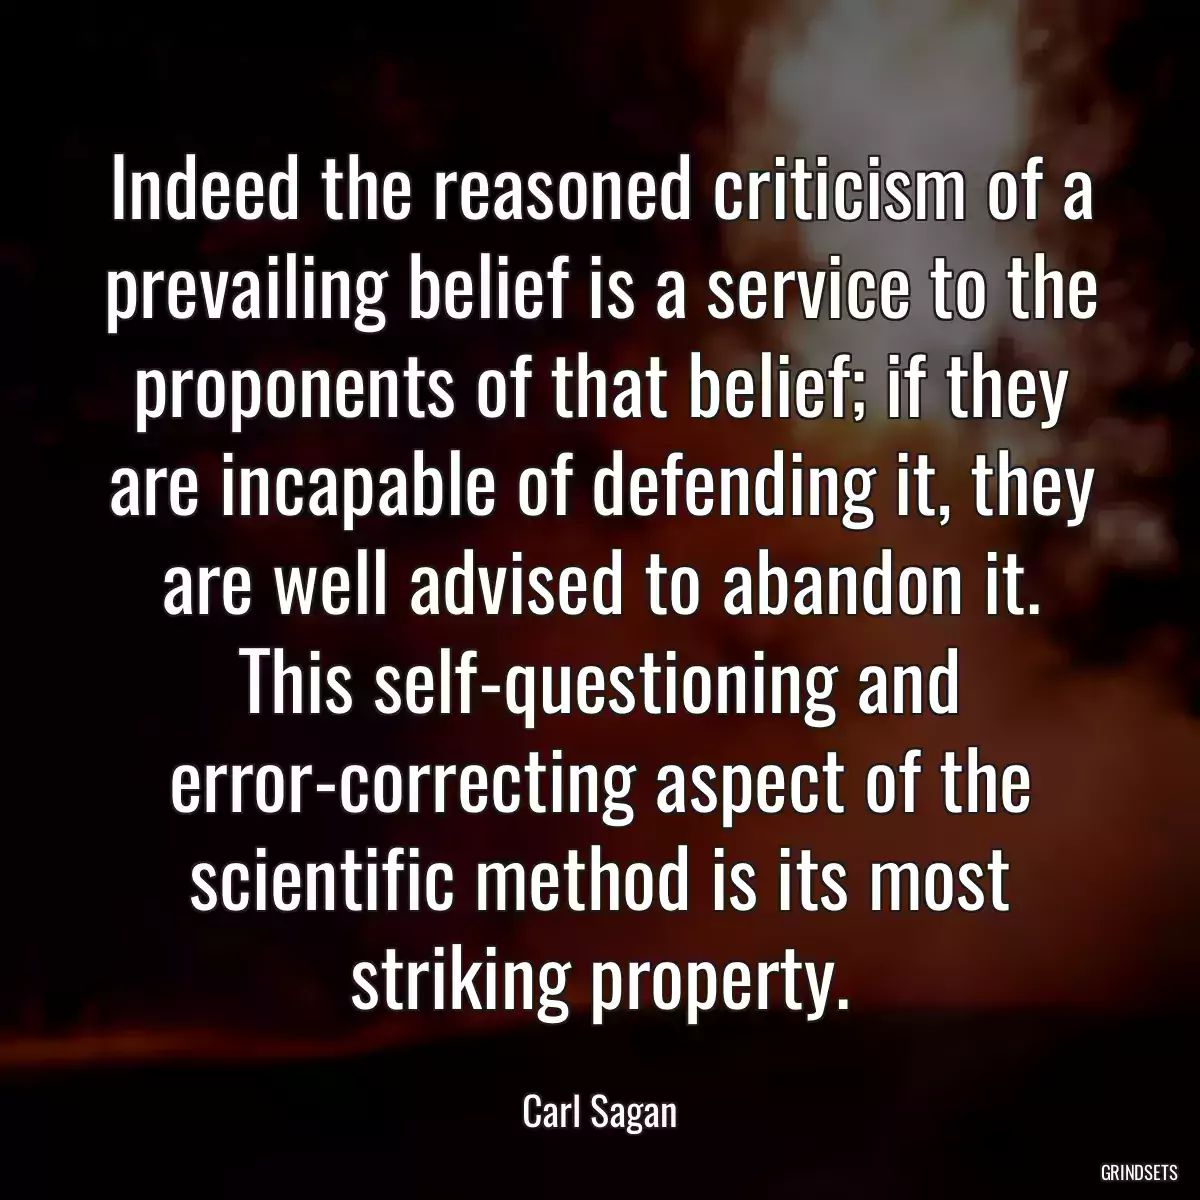 Indeed the reasoned criticism of a prevailing belief is a service to the proponents of that belief; if they are incapable of defending it, they are well advised to abandon it. This self-questioning and error-correcting aspect of the scientific method is its most striking property.